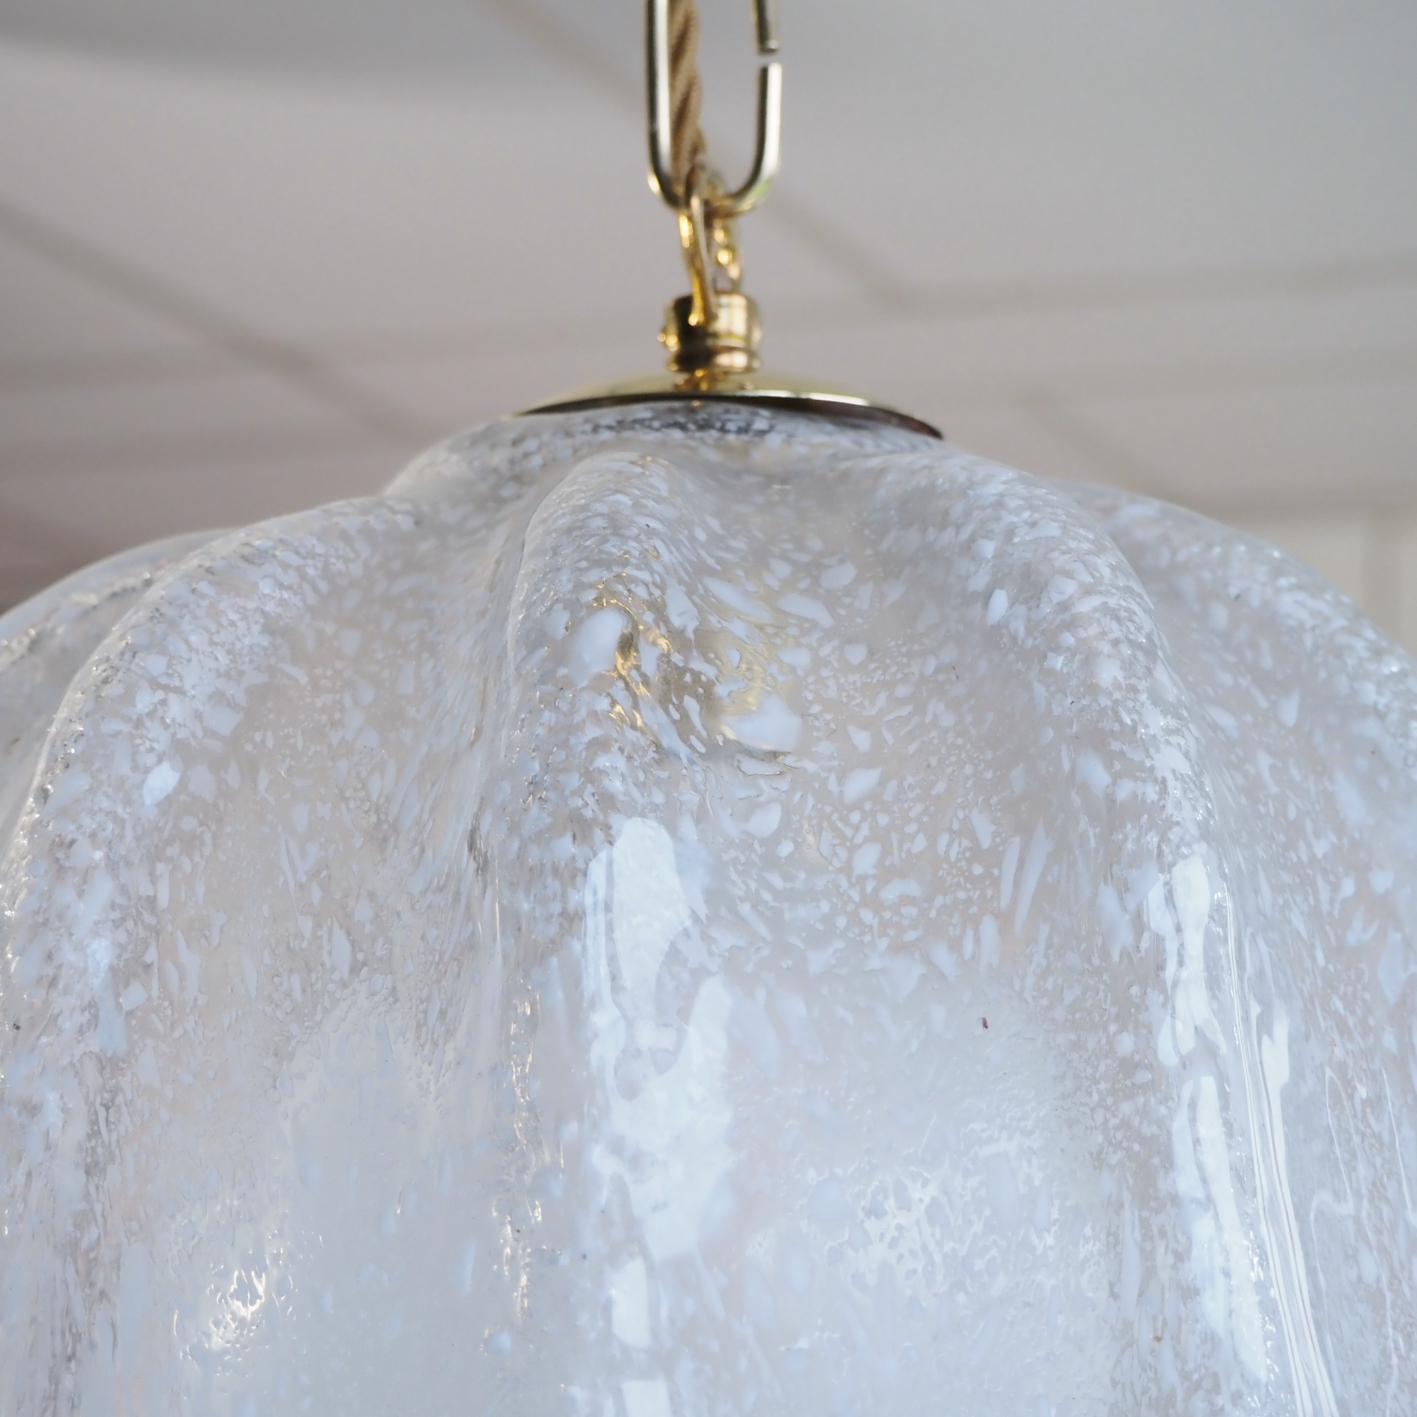 Hanging light in speckled Murano glass